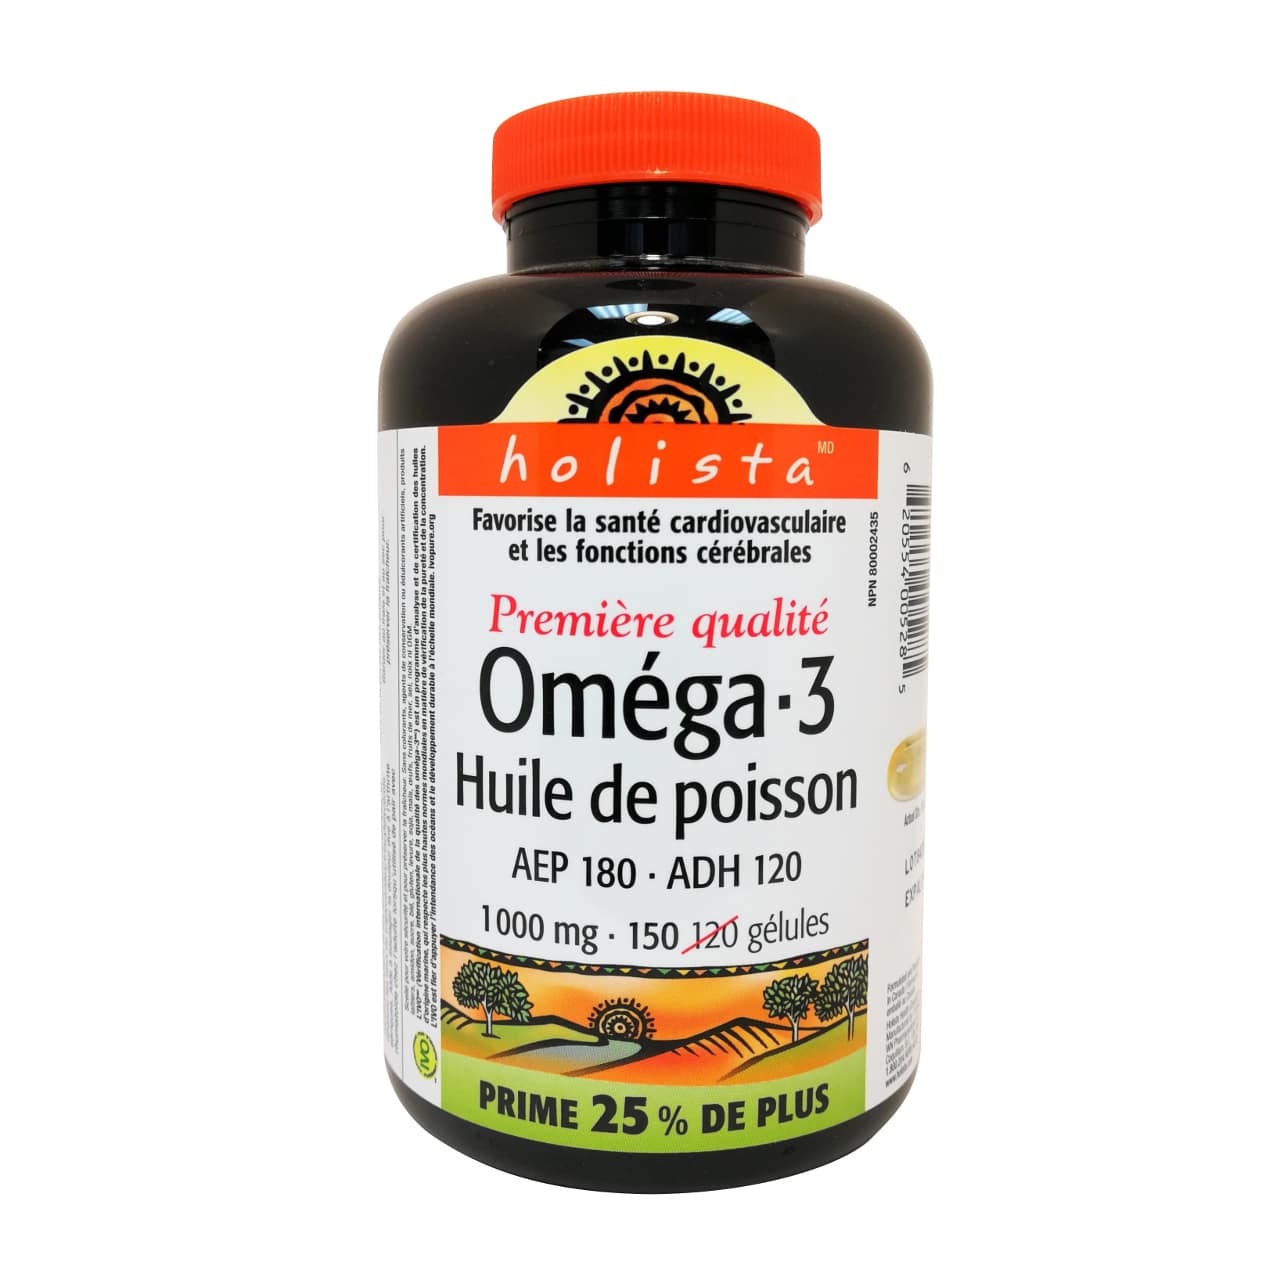 Product label for Holista Omega-3 Fish Oil 1000mg in French